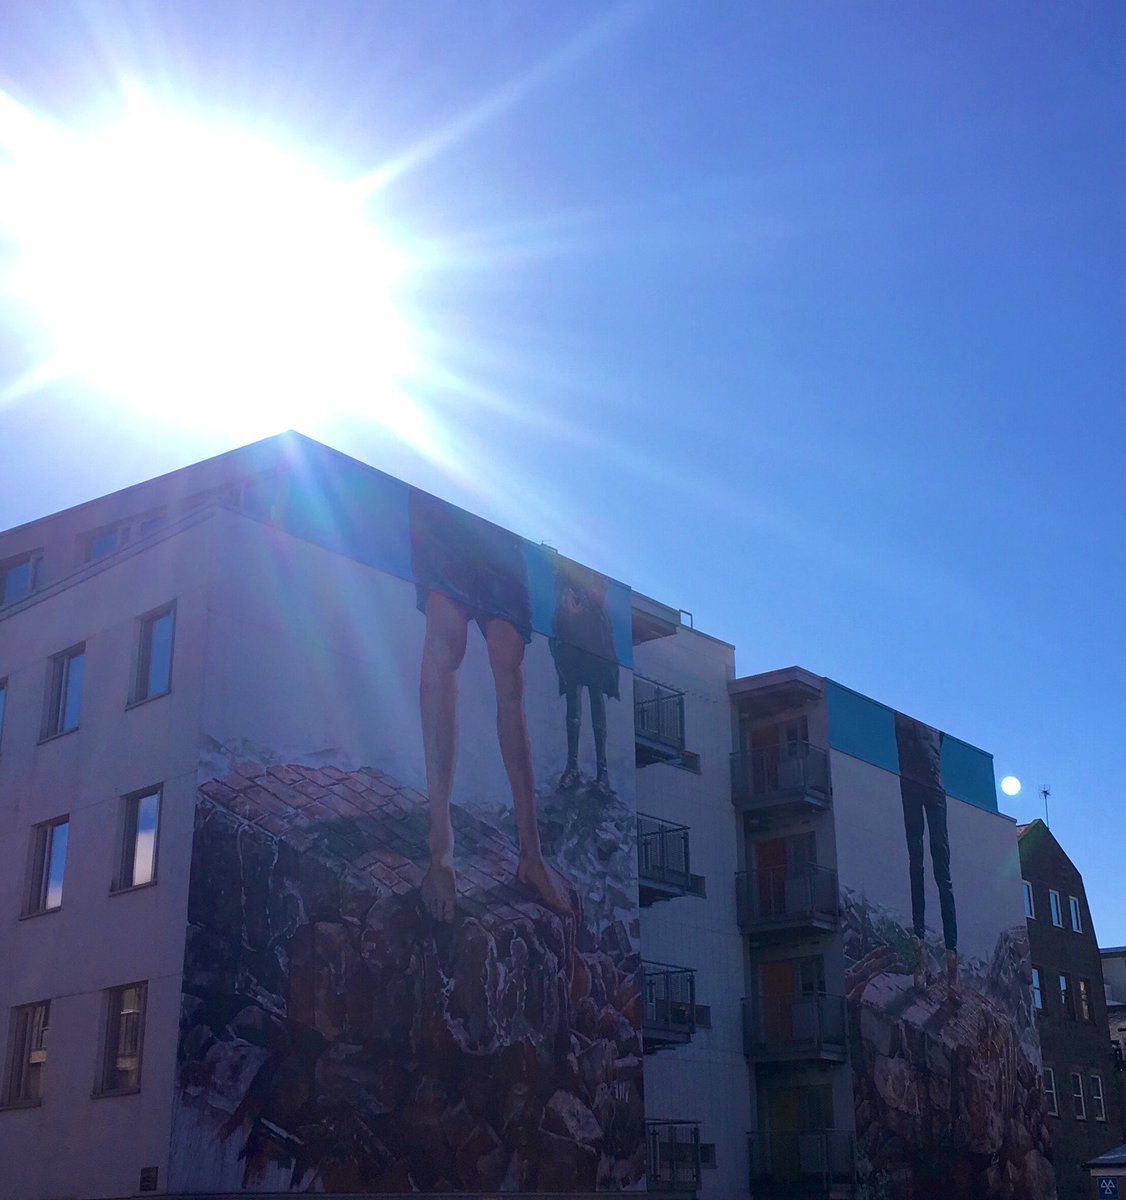 Sun splitting the sky making @nuartaberdeen pop. Can’t wait for Easter and the next wave of international artists bringing colour and life to #Aberdeen @nuartaberdeen #nuartaberdeen #nuartfestival #VisitABDN